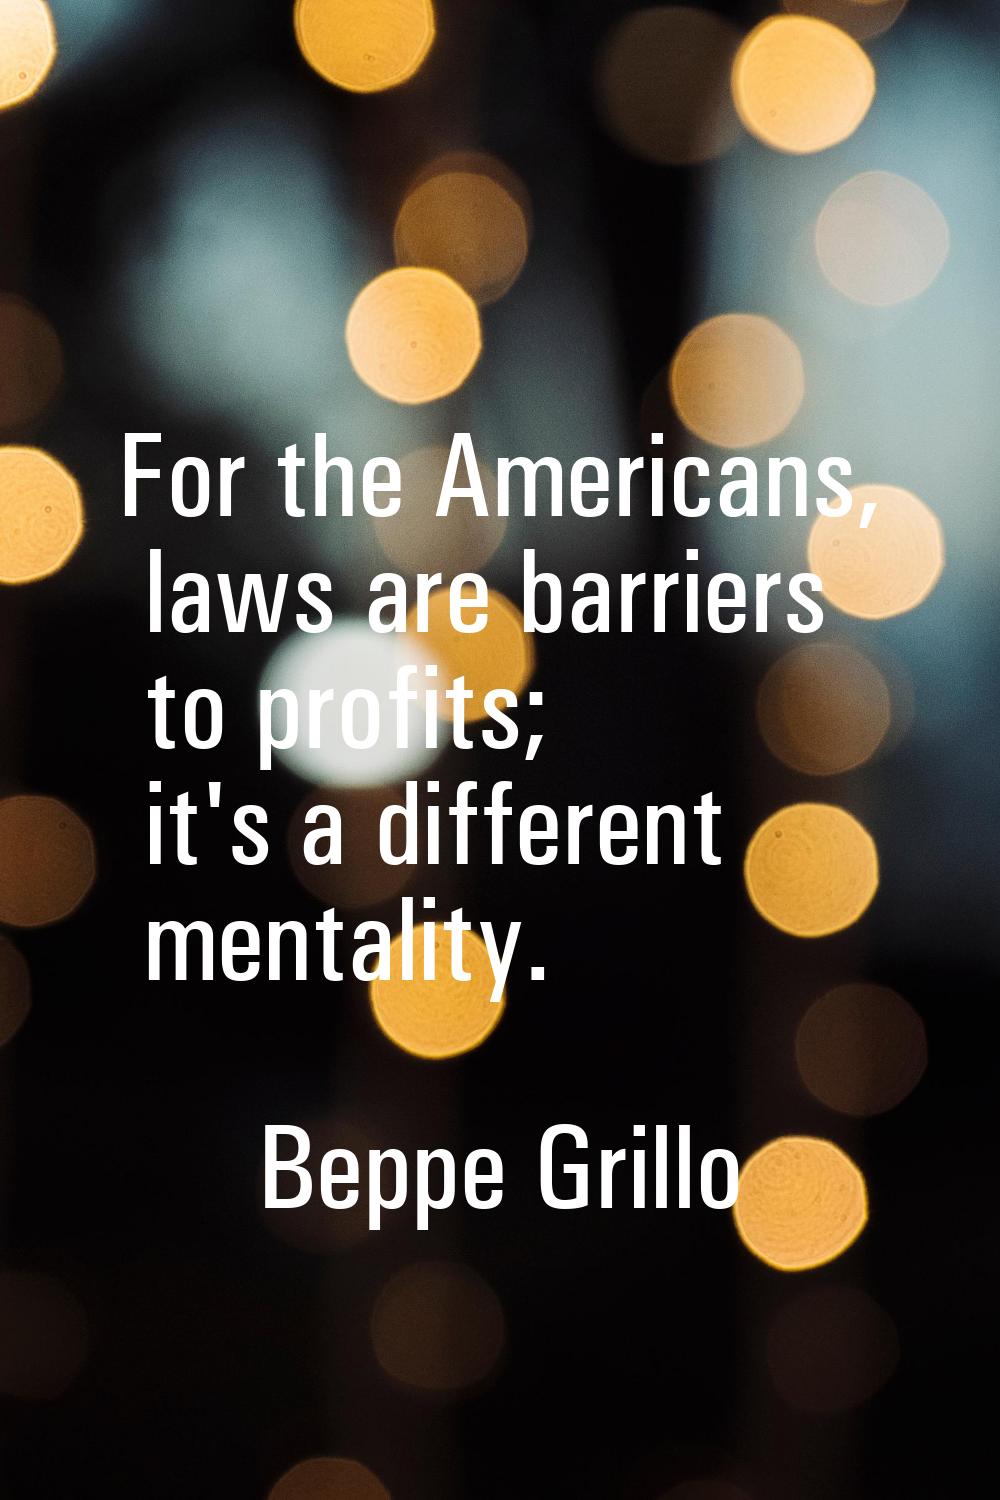 For the Americans, laws are barriers to profits; it's a different mentality.